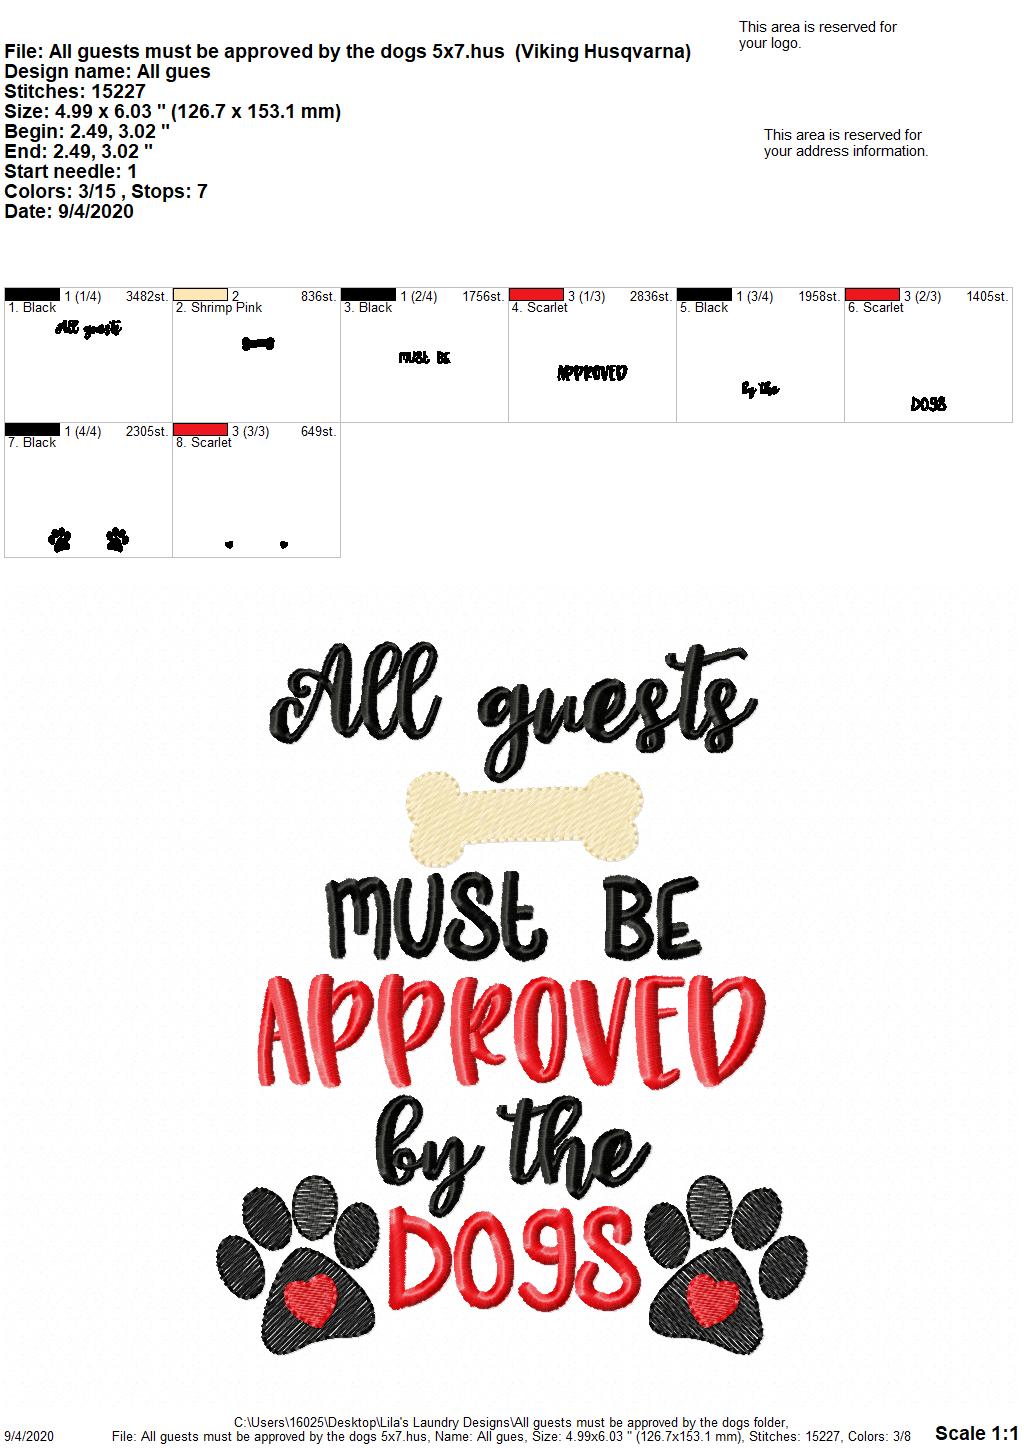 All guests must be approved by the dogs - 2 Sizes - Digital Embroidery Design